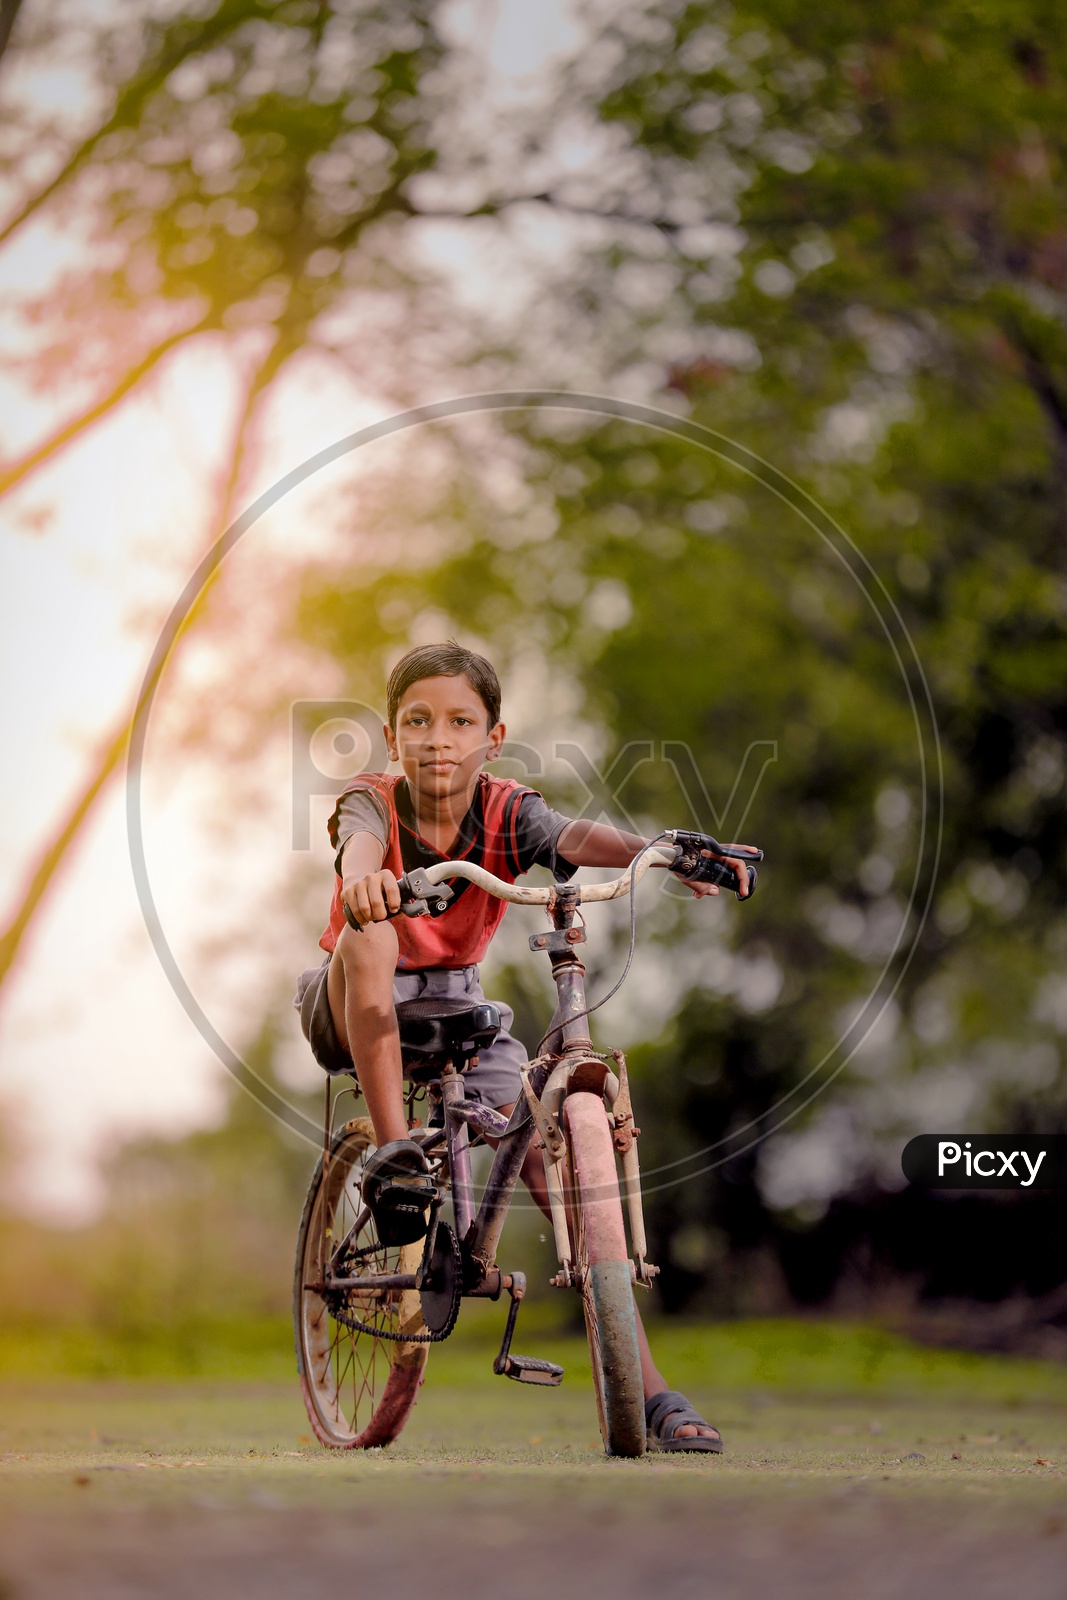 Indian Boy Child Riding Bicycle in Rural India with a Smiling Face And Looking To Camera